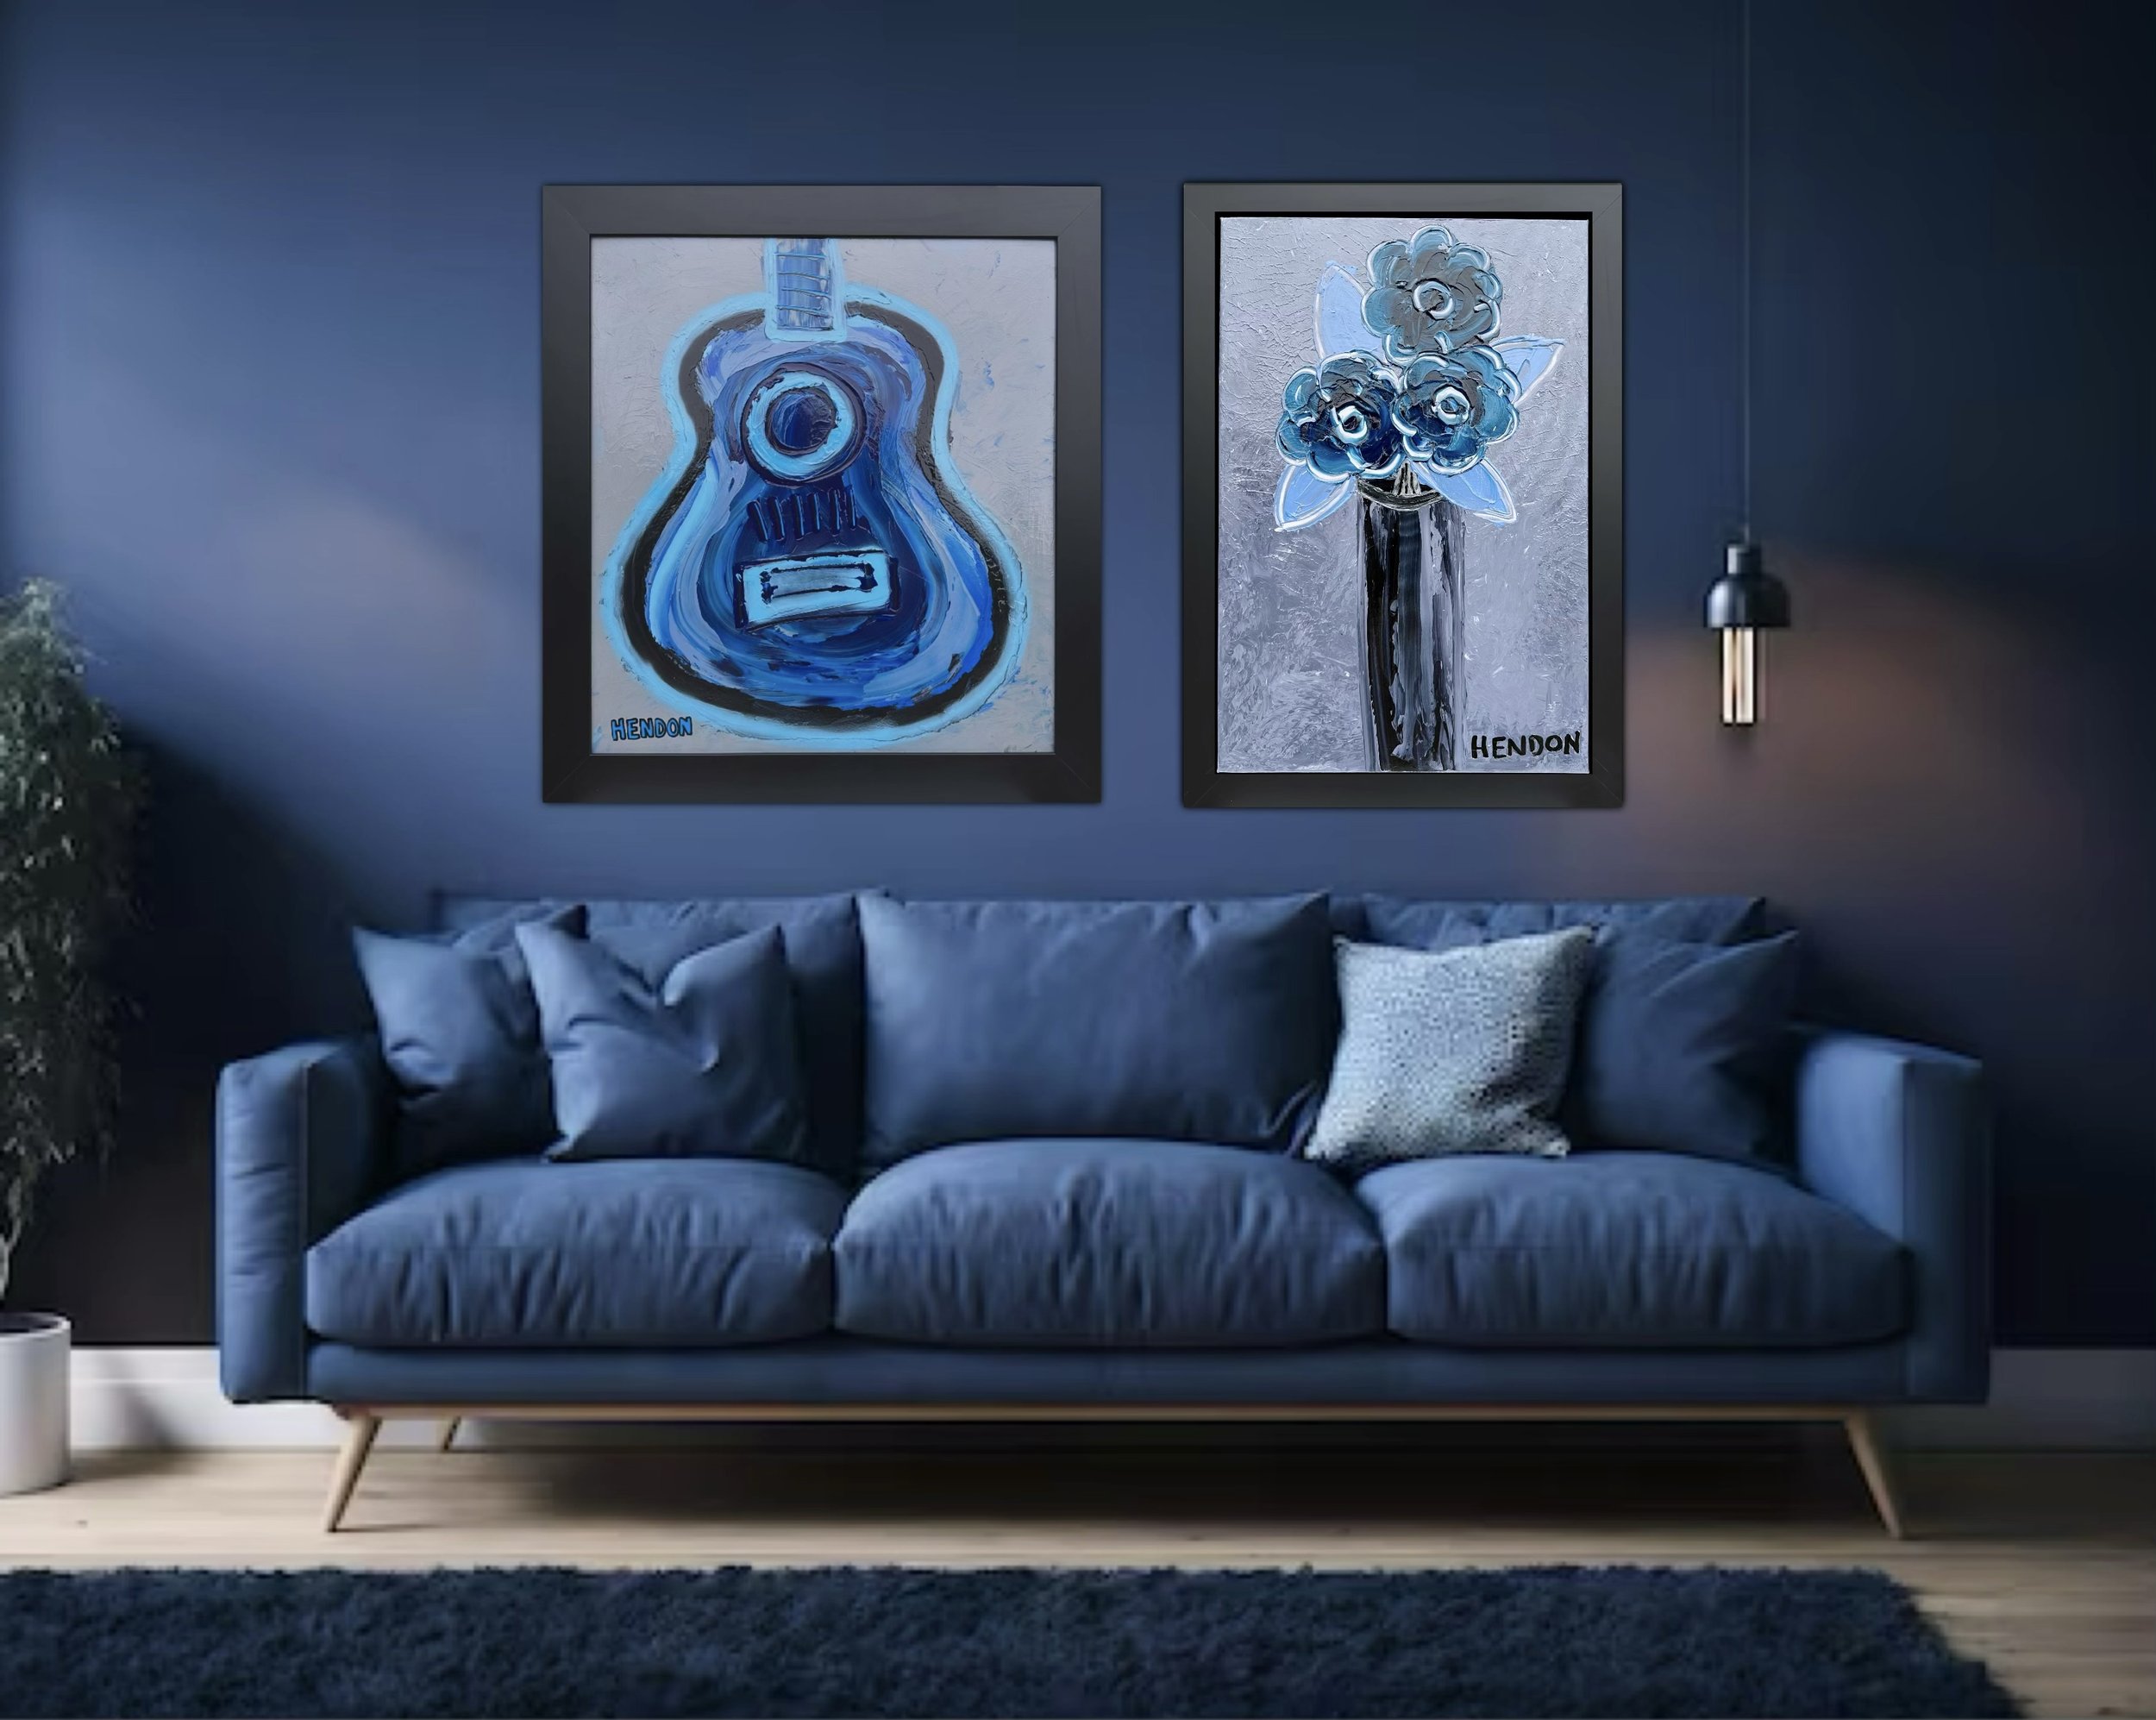  Two Hendon pieces reimagined; blue room in situ.  